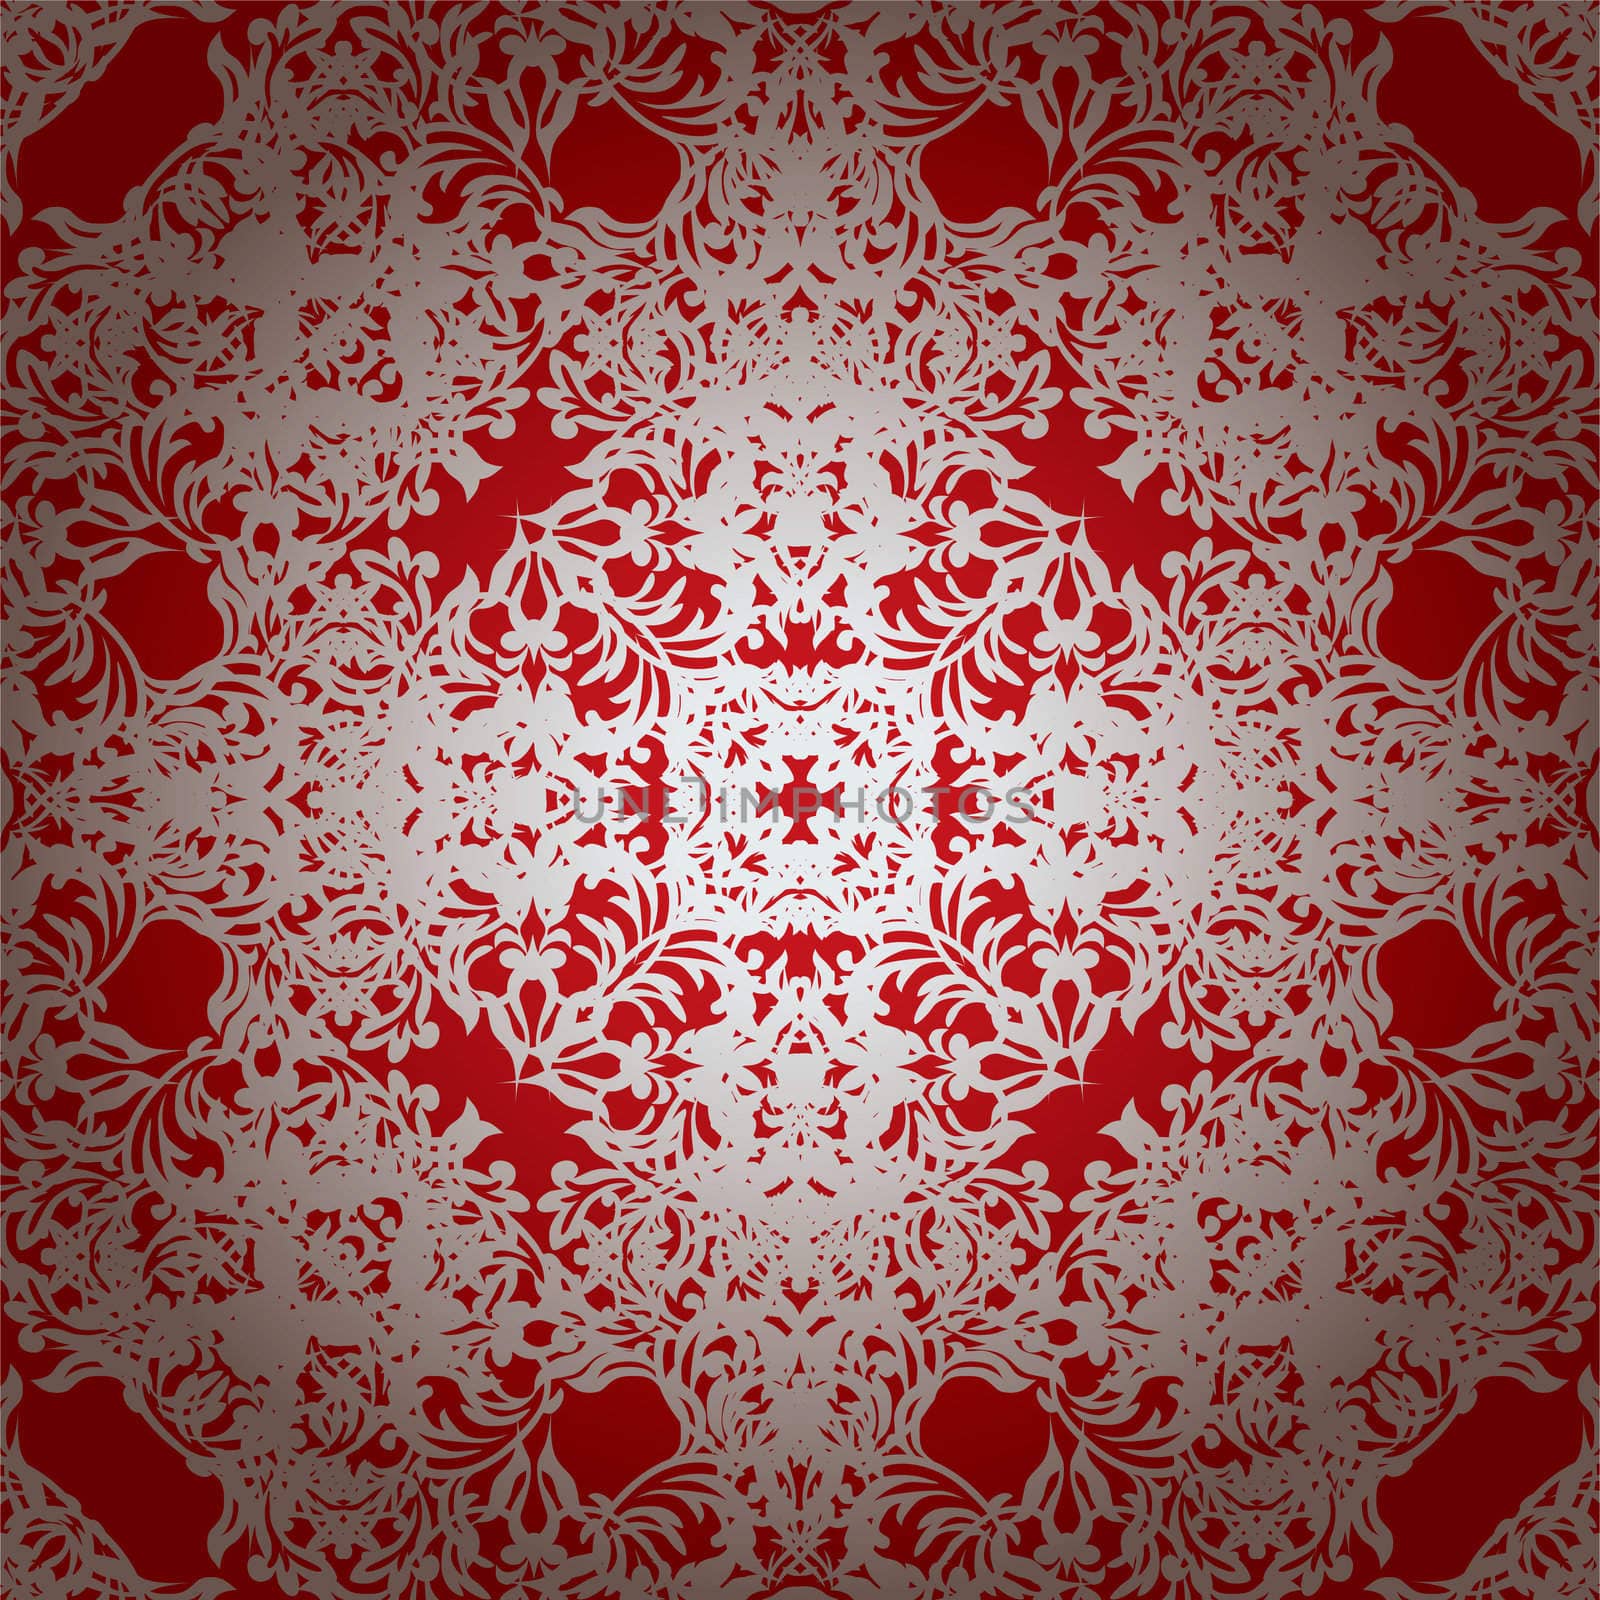 Royal red seamless repeating illustrated background with silver overlay